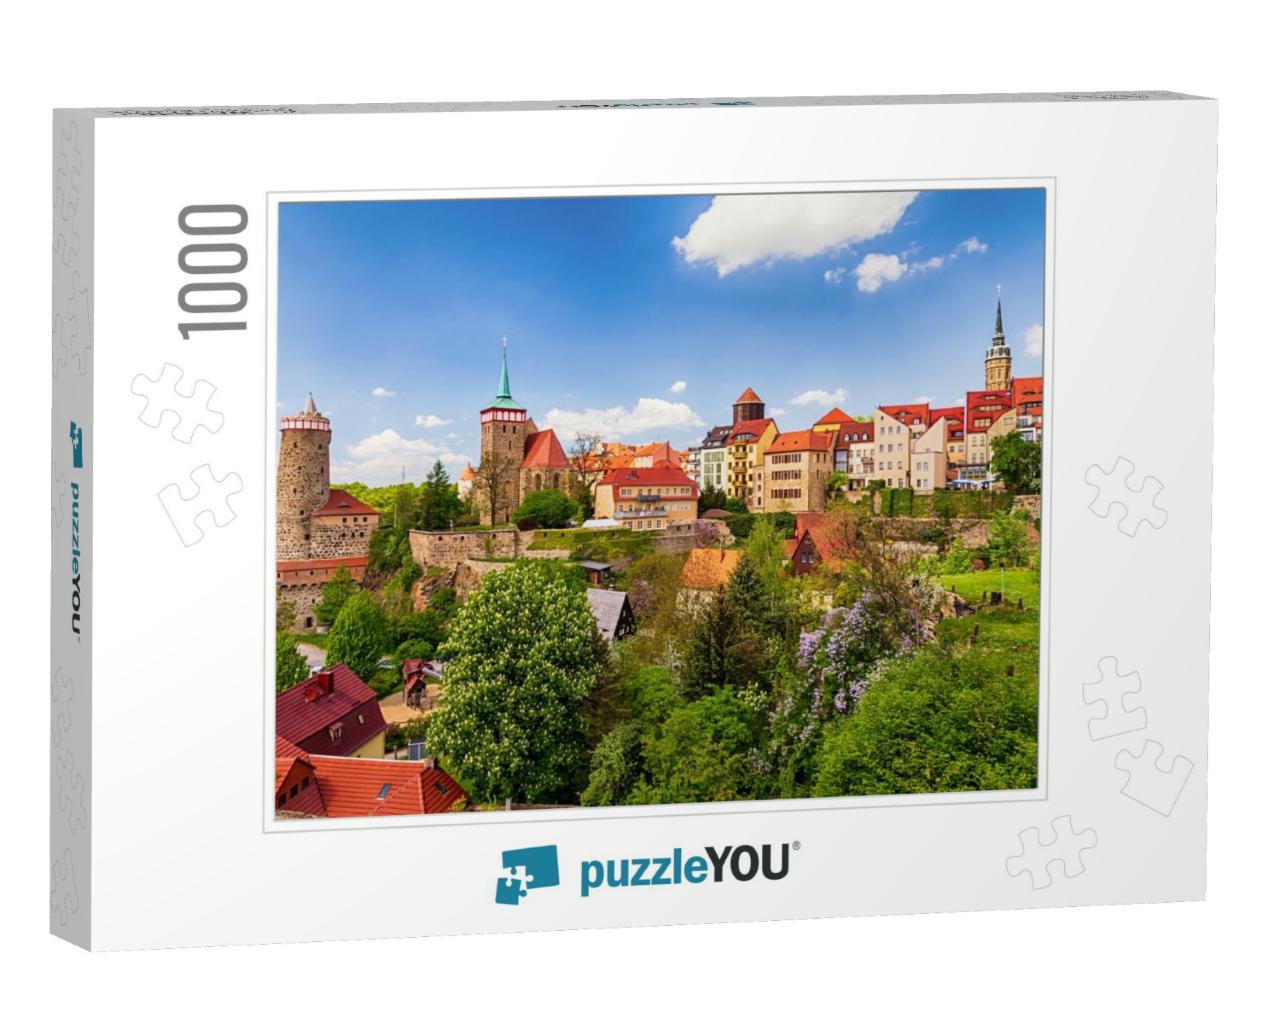 View of Old Town Bautzen in Eastern Saxony, Germany... Jigsaw Puzzle with 1000 pieces